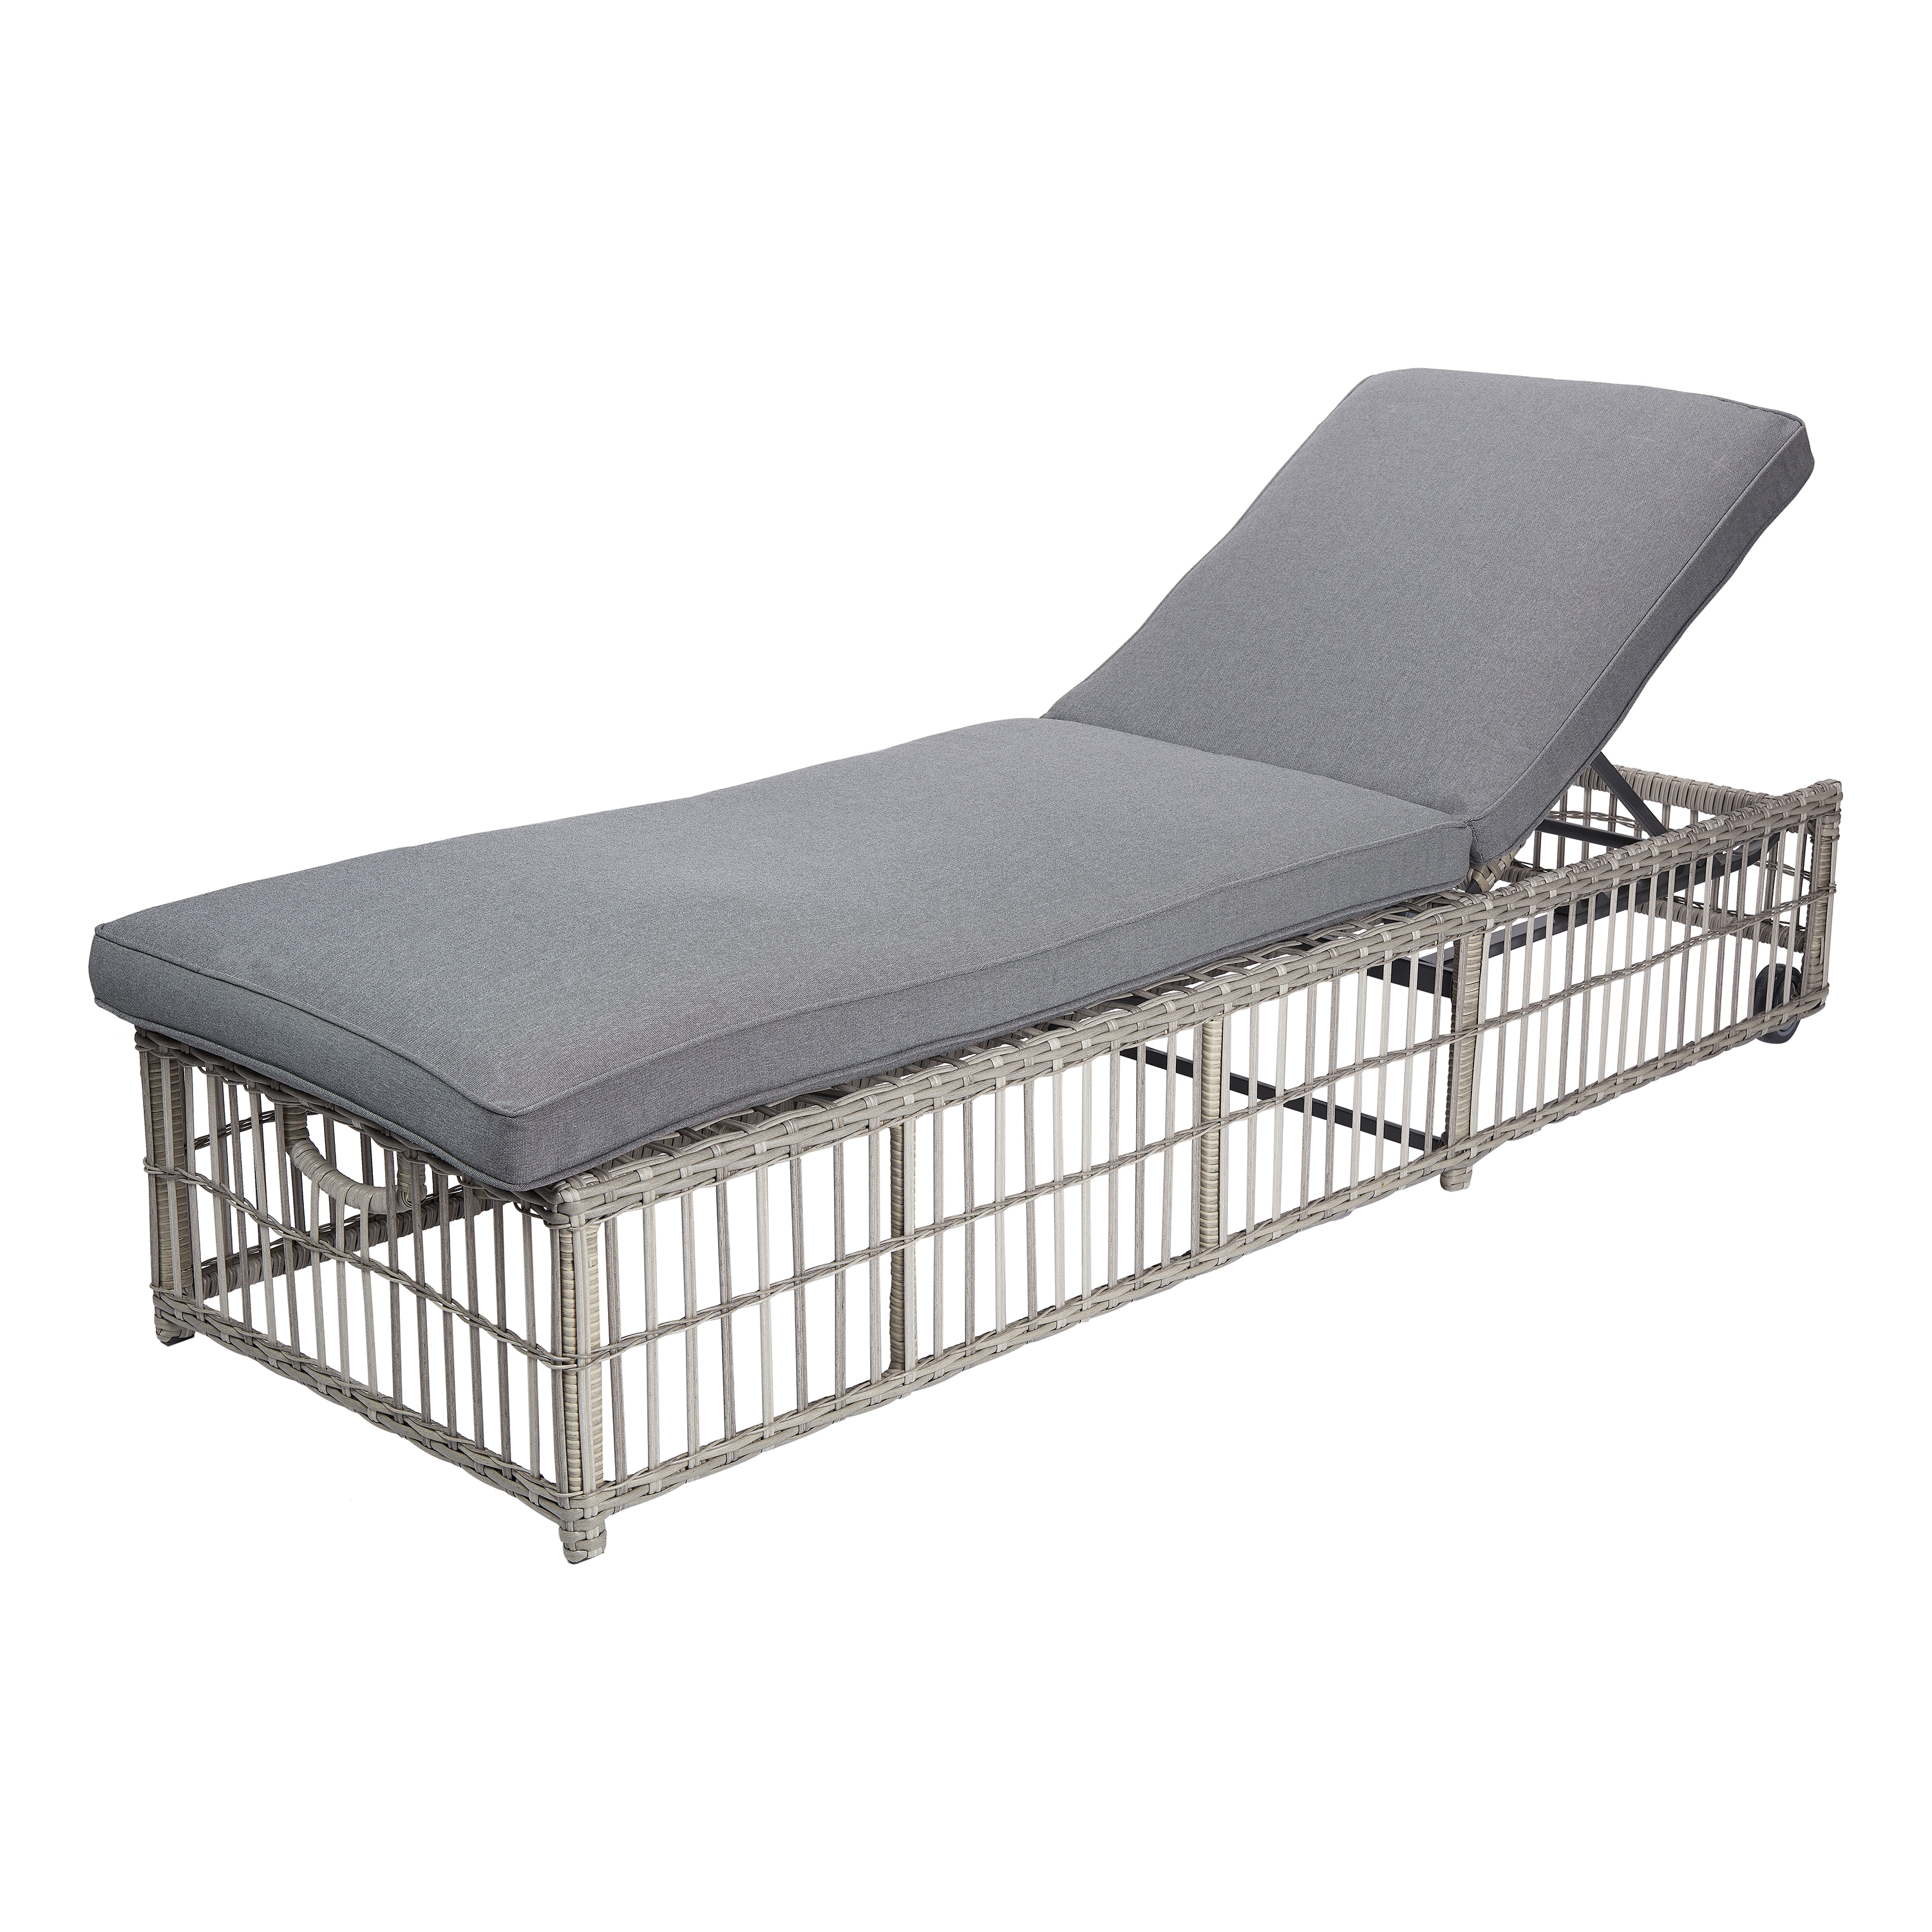 Better Homes & Gardens Belfair Outdoor Wicker Chaise Lounge with Cushions